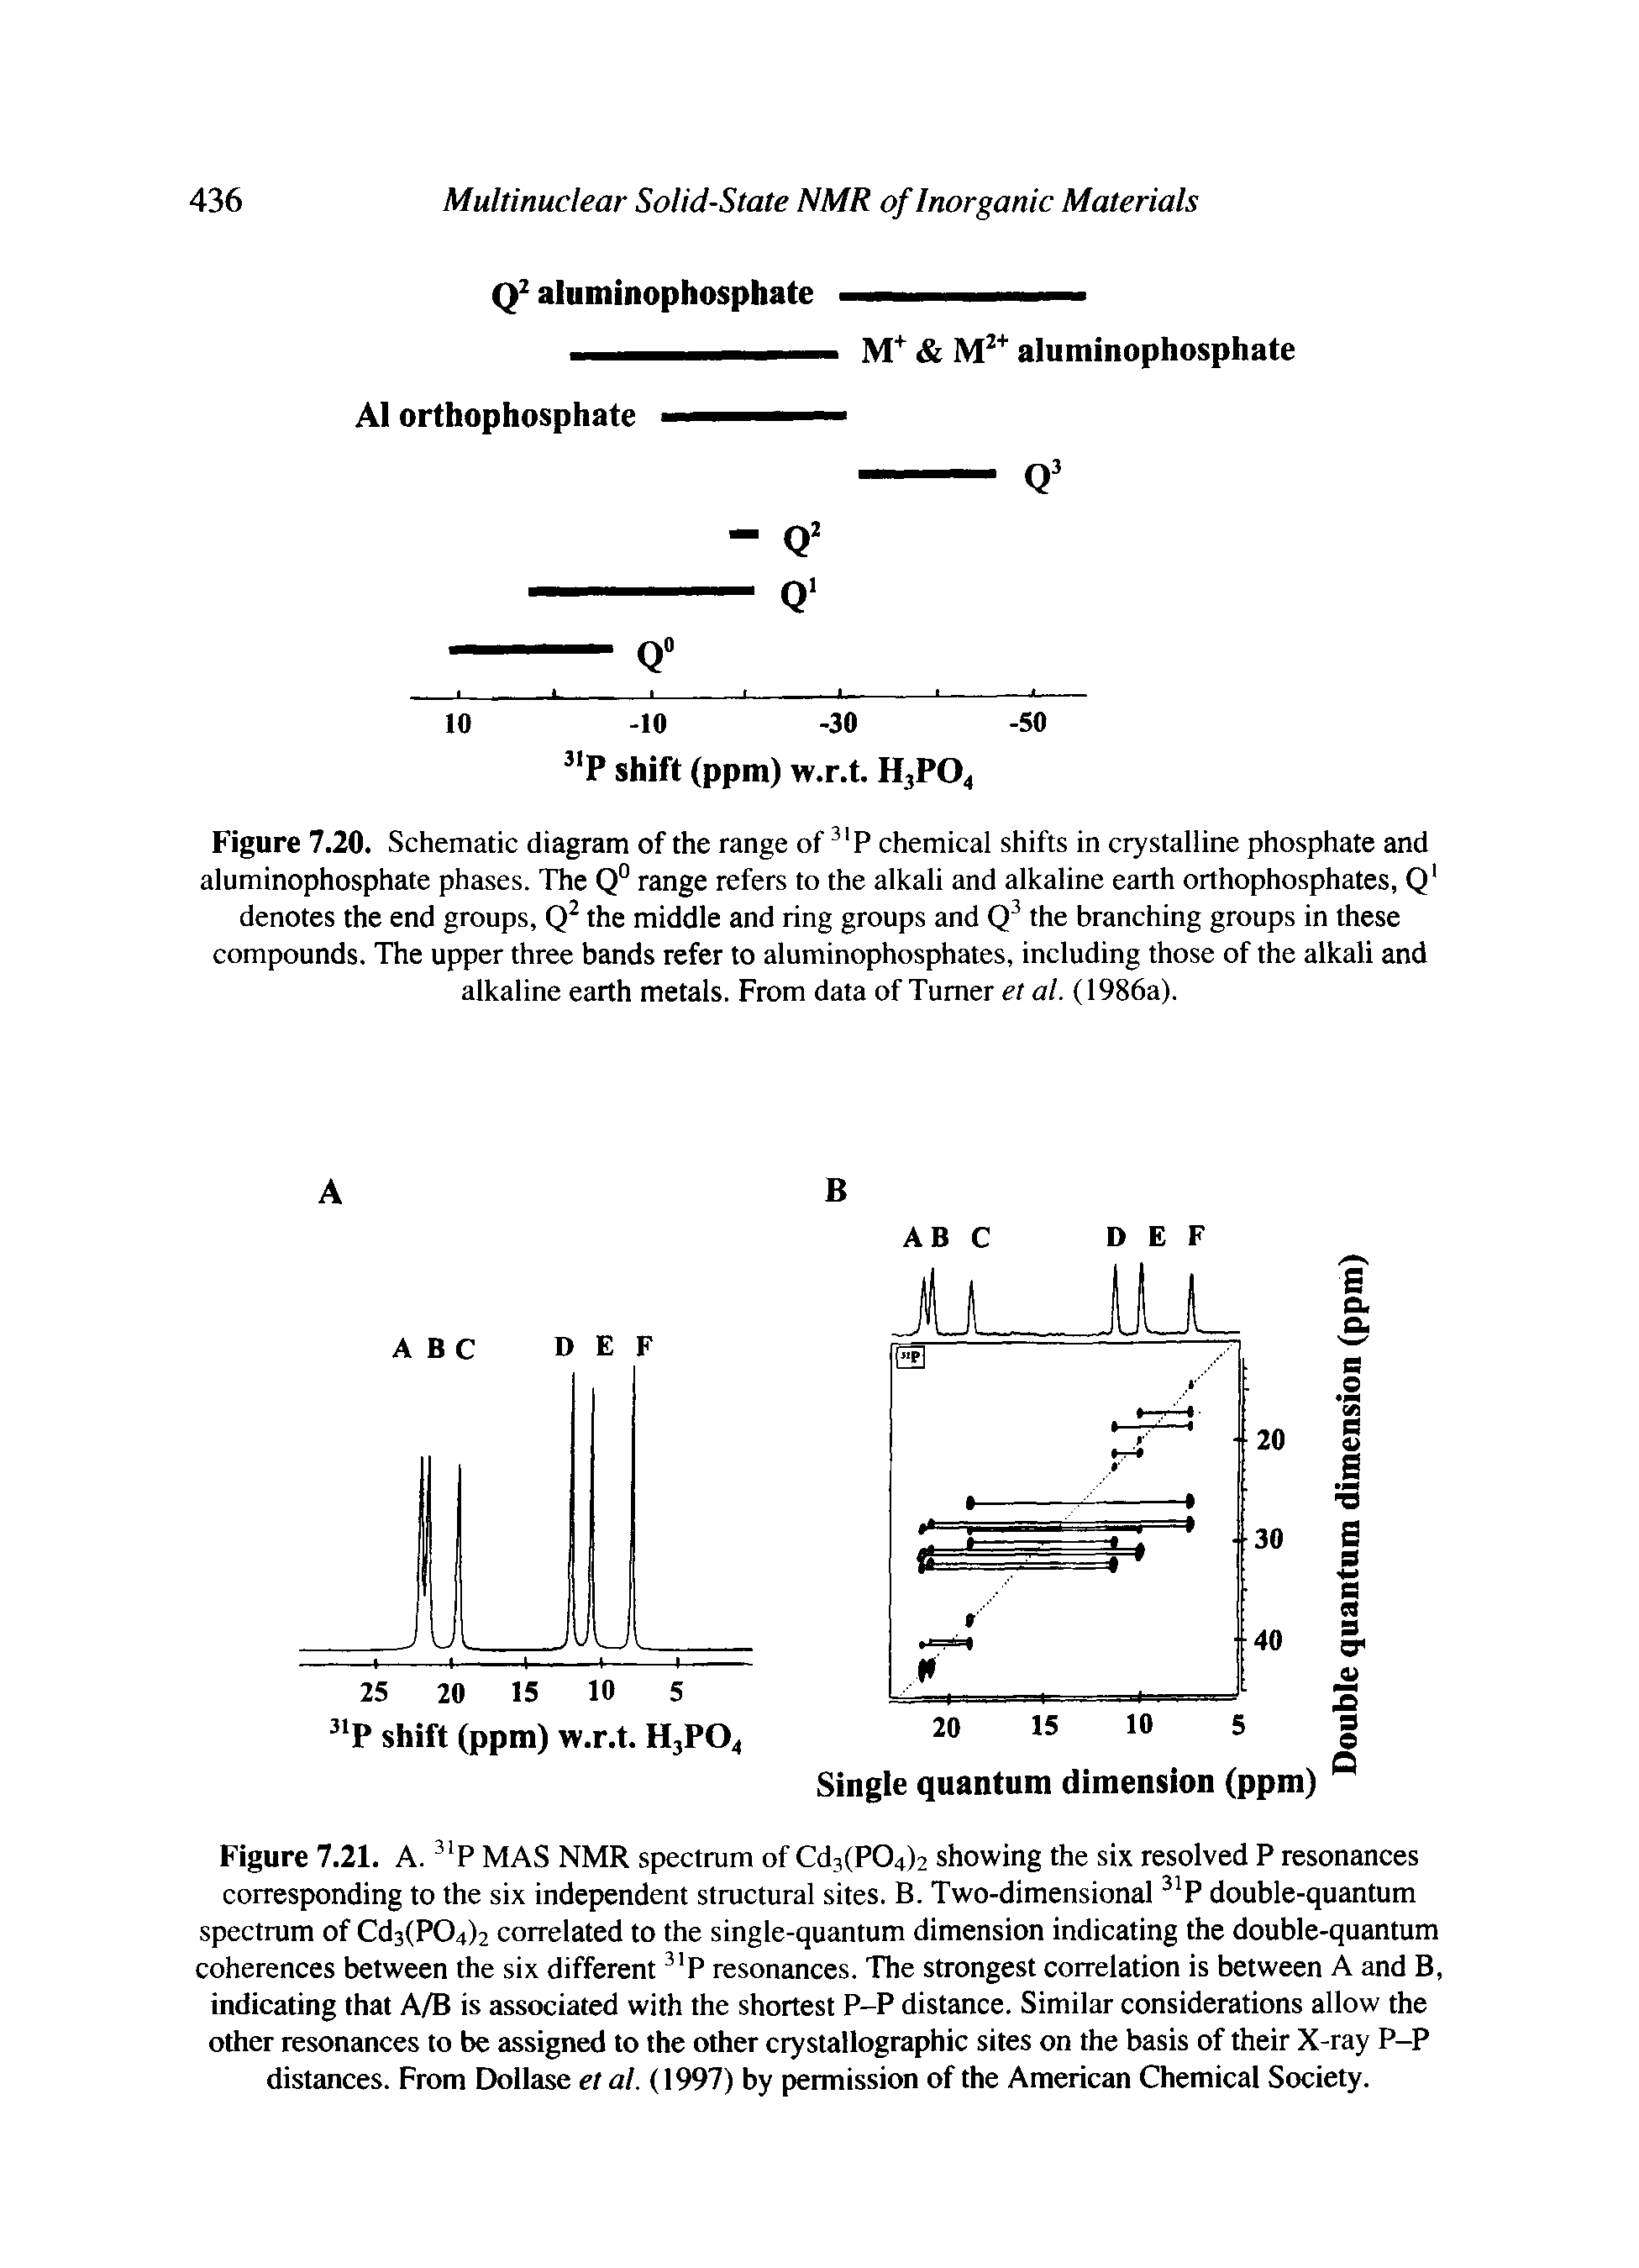 Figure 7.20. Schematic diagram of the range of P chemical shifts in crystalline phosphate and aluminophosphate phases. The Q° range refers to the alkali and alkaline earth orthophosphates, Q denotes the end groups, the middle and ring groups and the branching groups in these compounds. The upper three bands refer to aluminophosphates, including those of the alkali and alkaline earth metals. From data of Turner et al. (1986a).